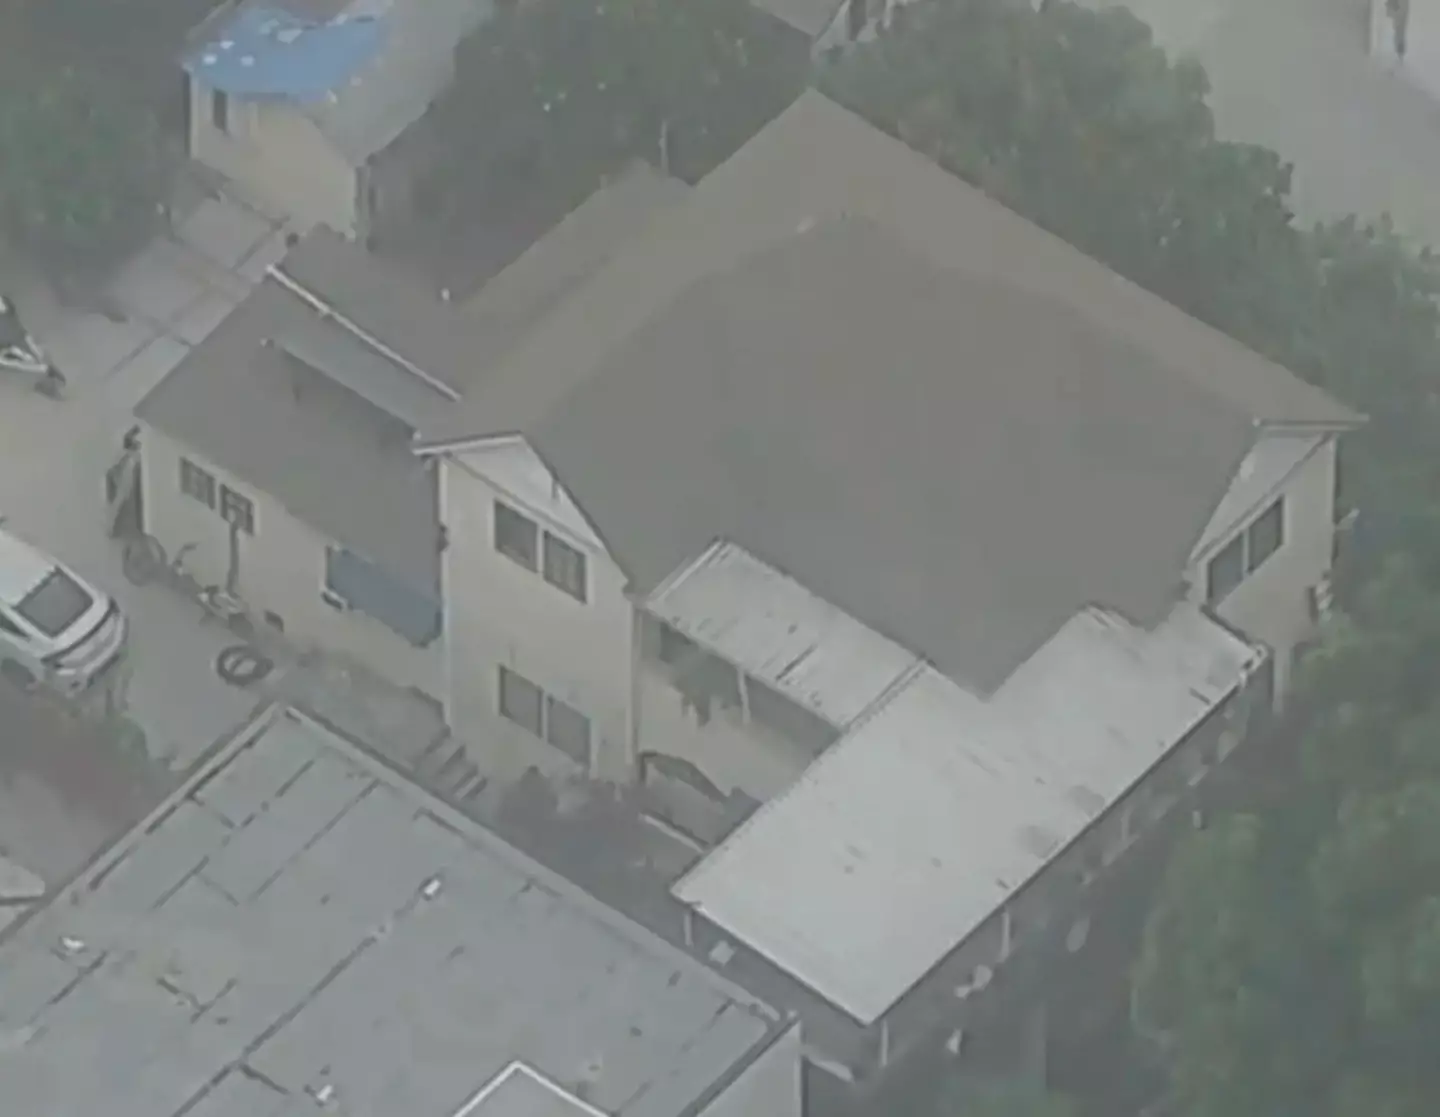 A body was found wrapped in plastic in a Los Angeles home over the weekend.